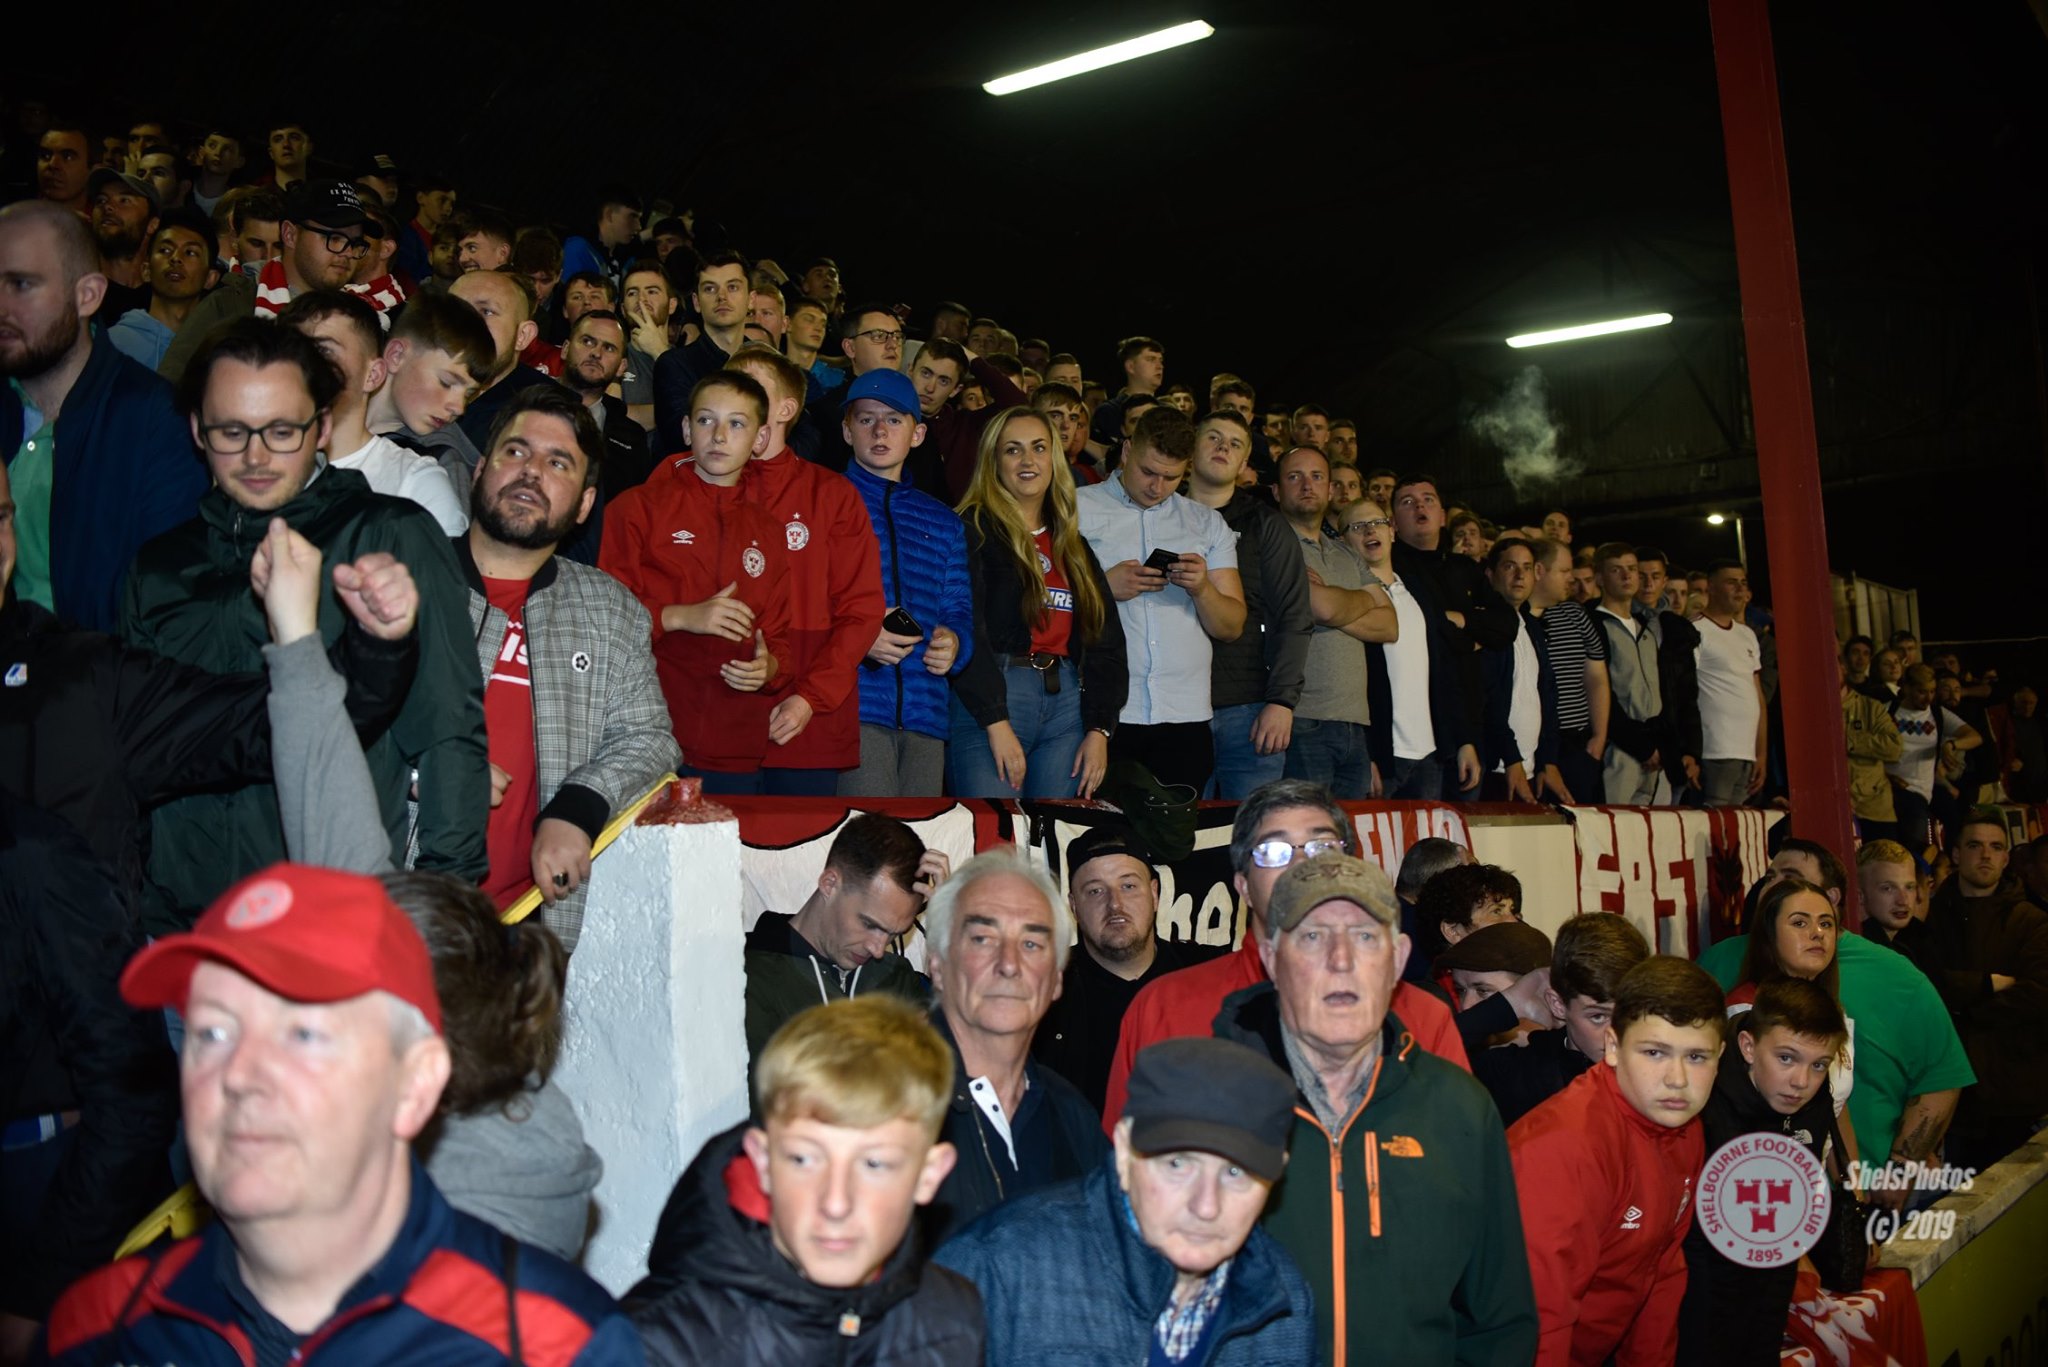 Shels 2020 season tickets available now